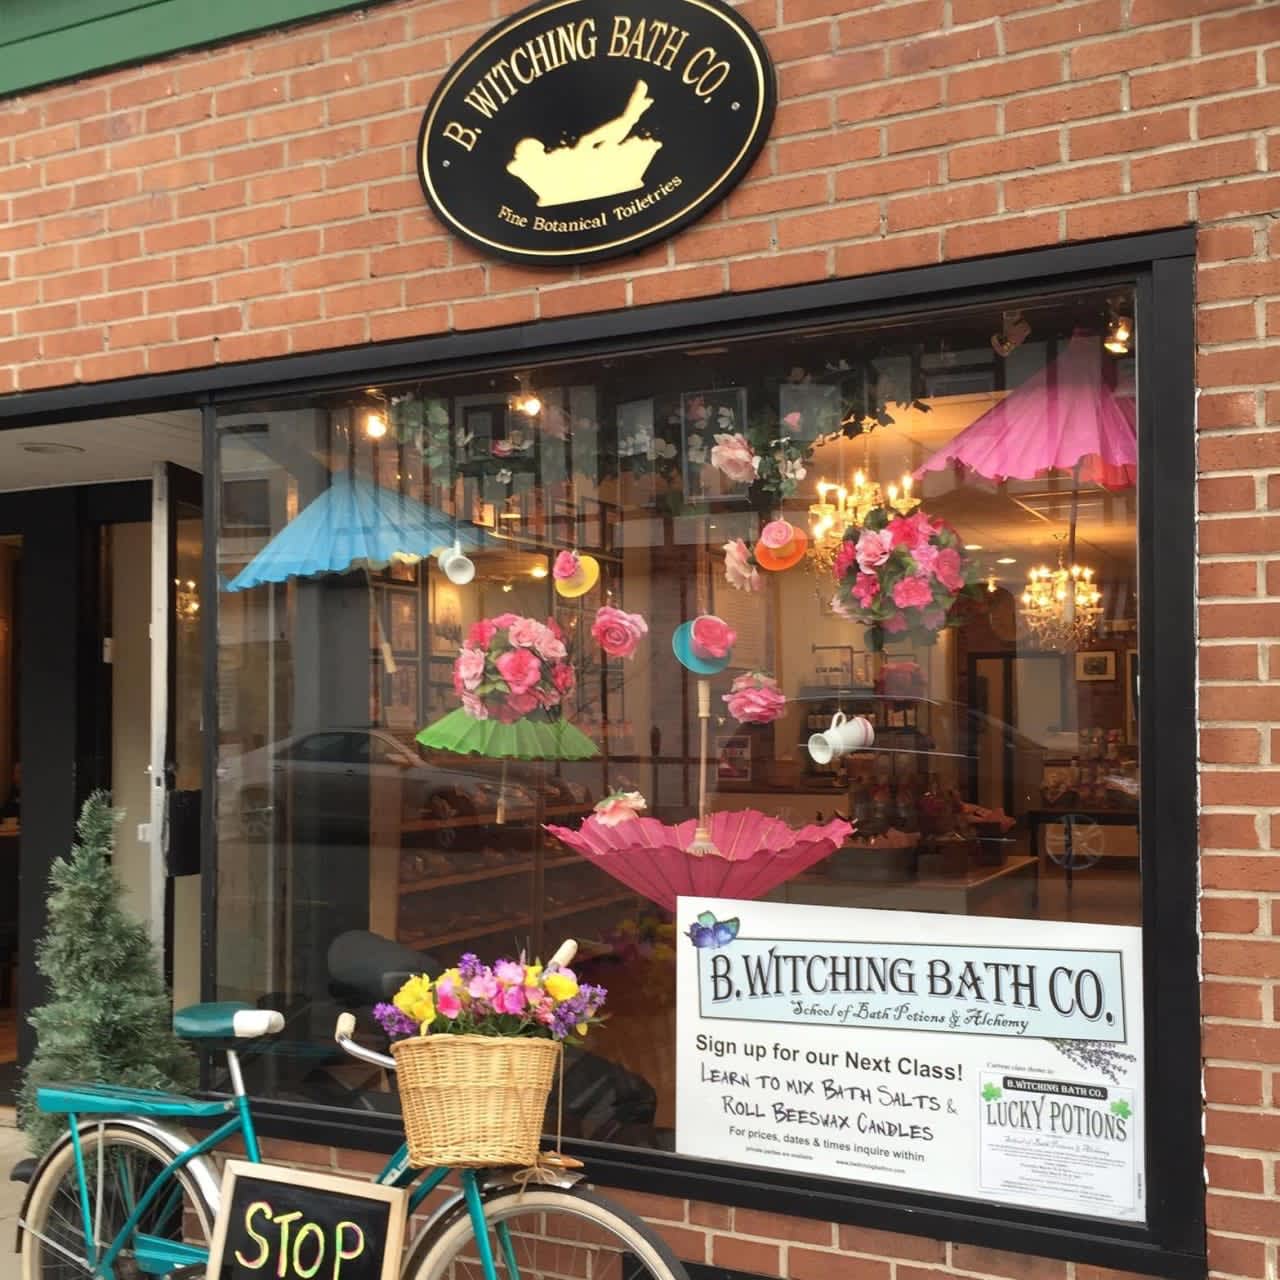 B.Witching Local, 174 Lincoln Ave.
Hawthorne, is having a Sip & Shop with wine from 1-3 p.m. on Small Business Saturday.